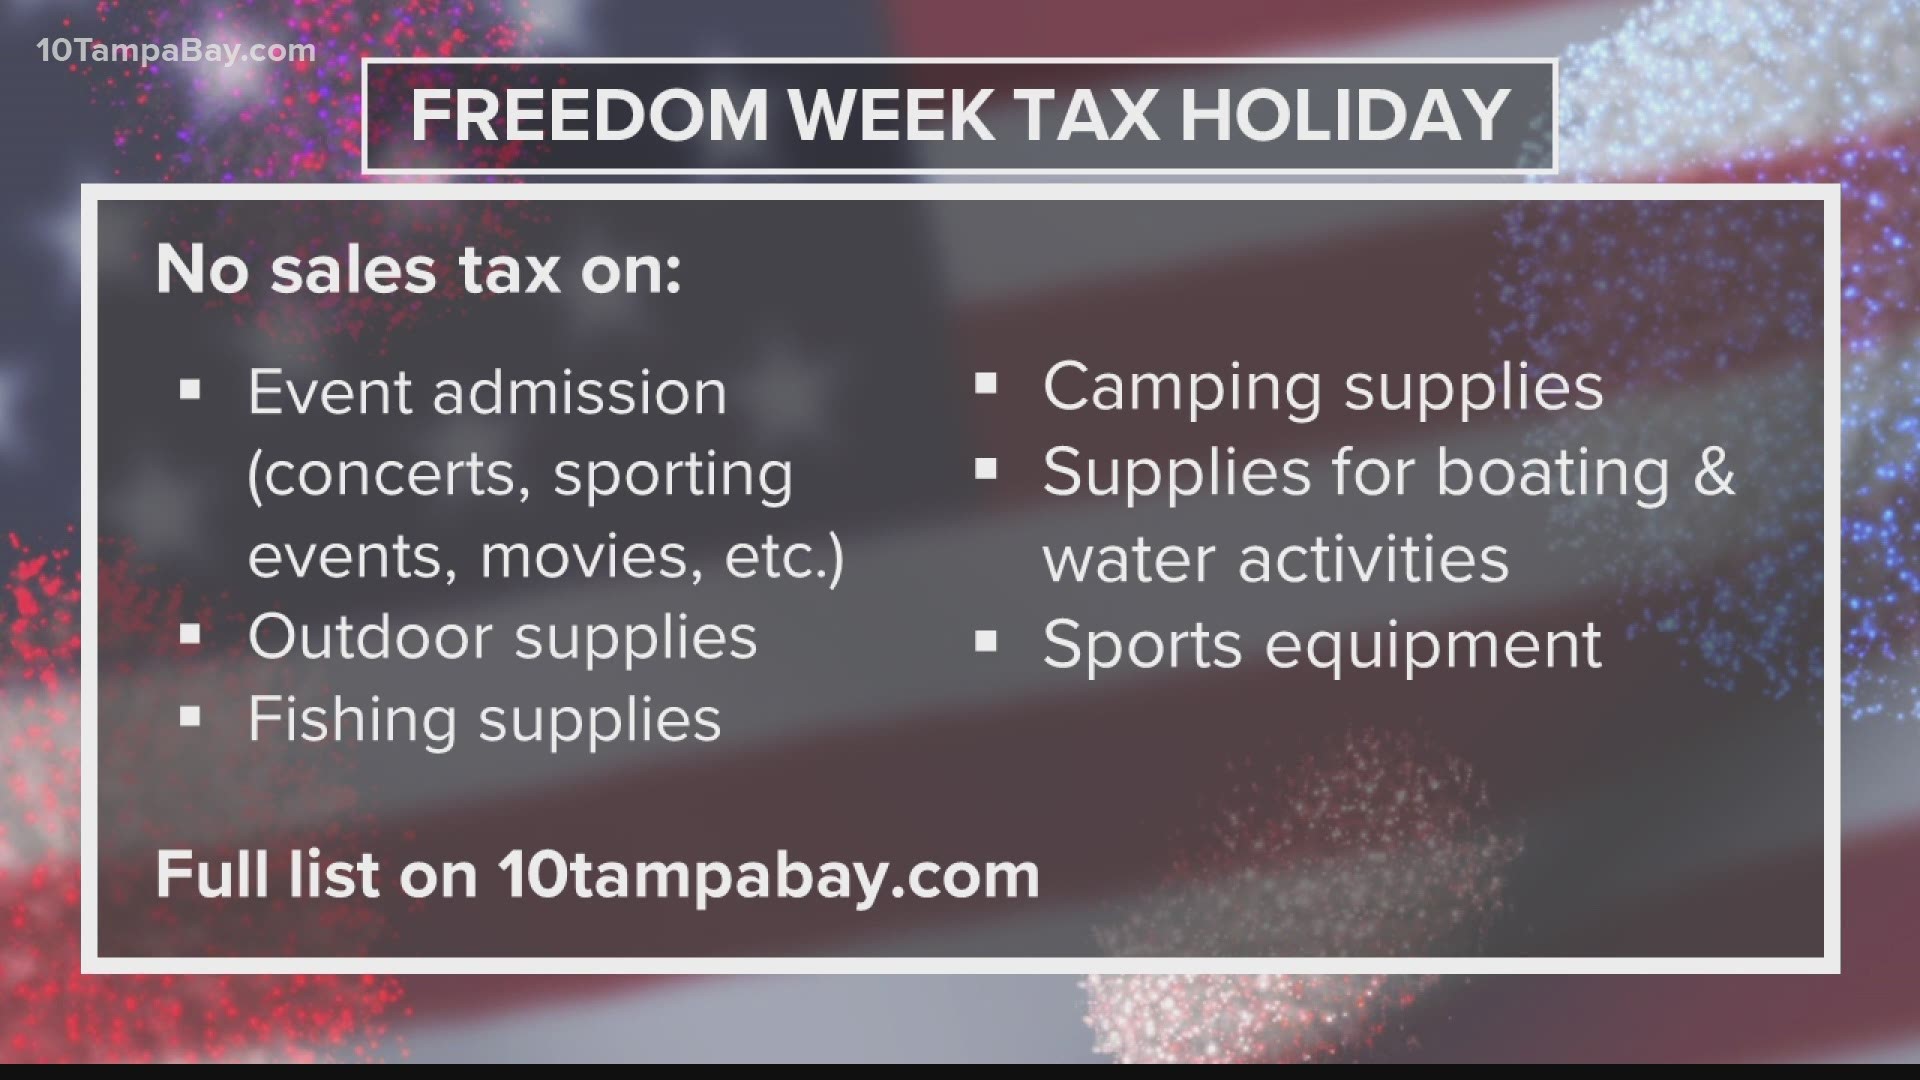 From July 1-7, you don't have to pay sales tax on things like camping equipment, museum tickets or festival entry fees.